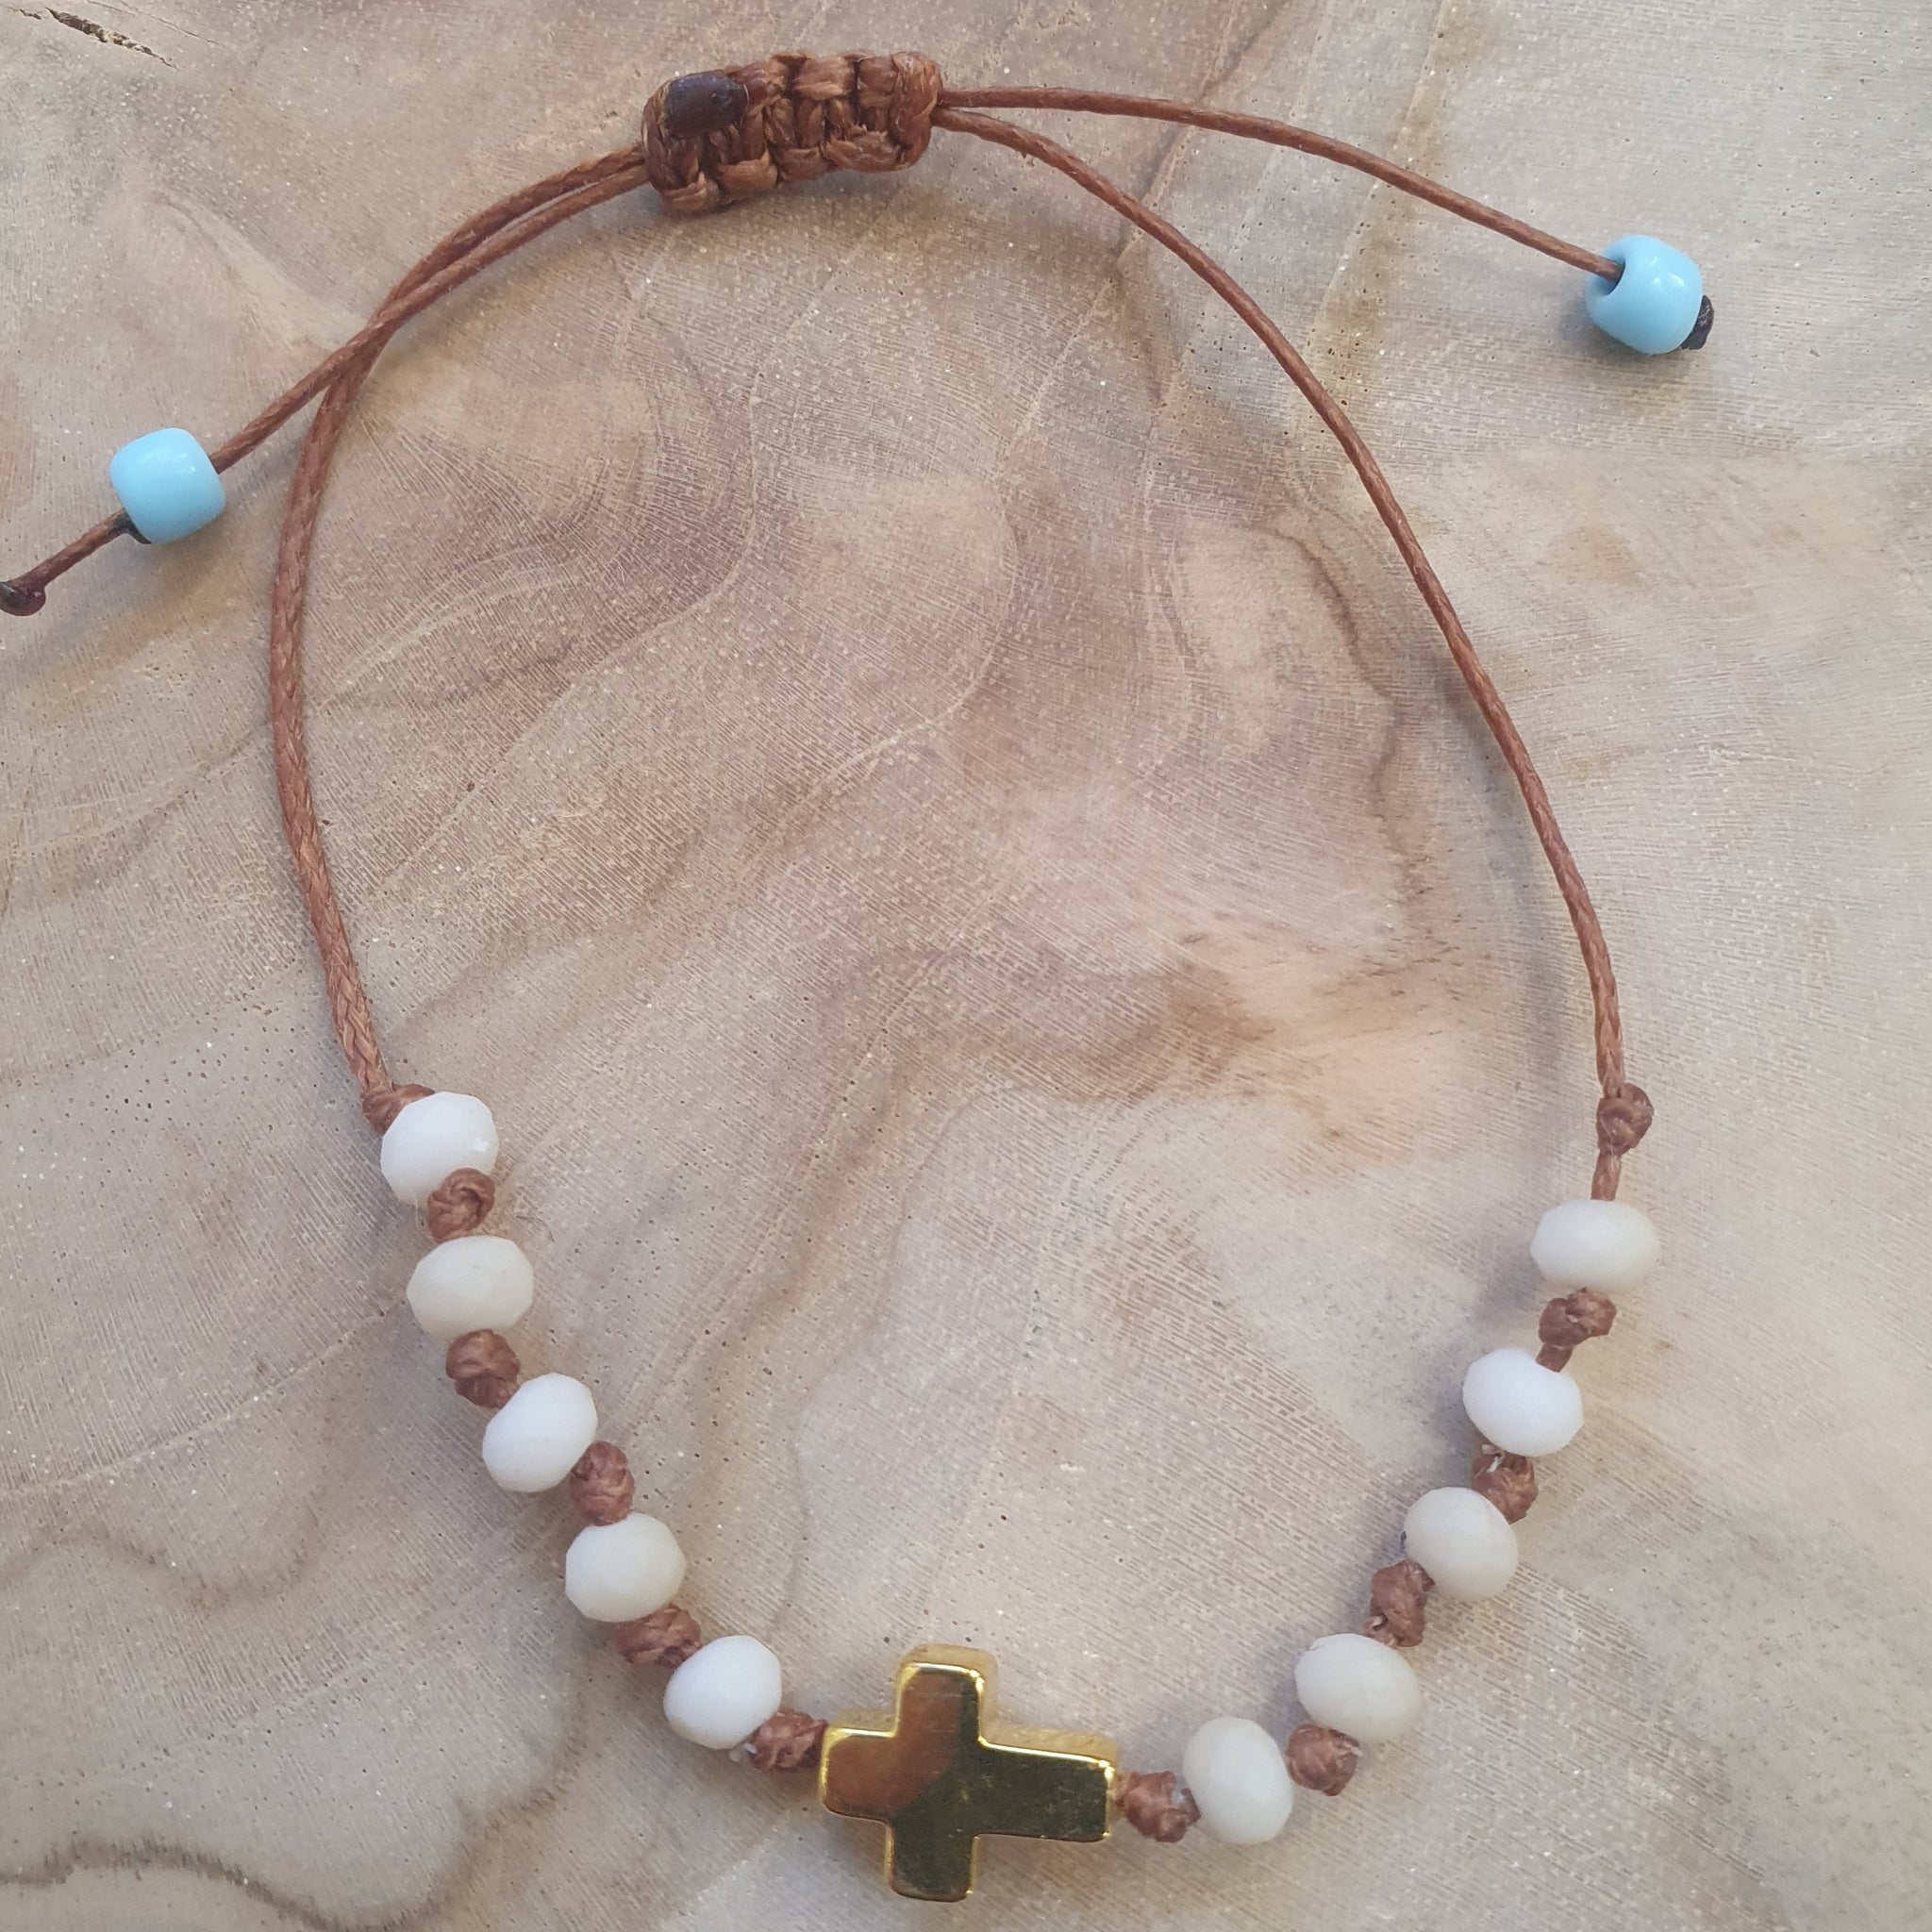 White_bead_and_cross_brcacelet